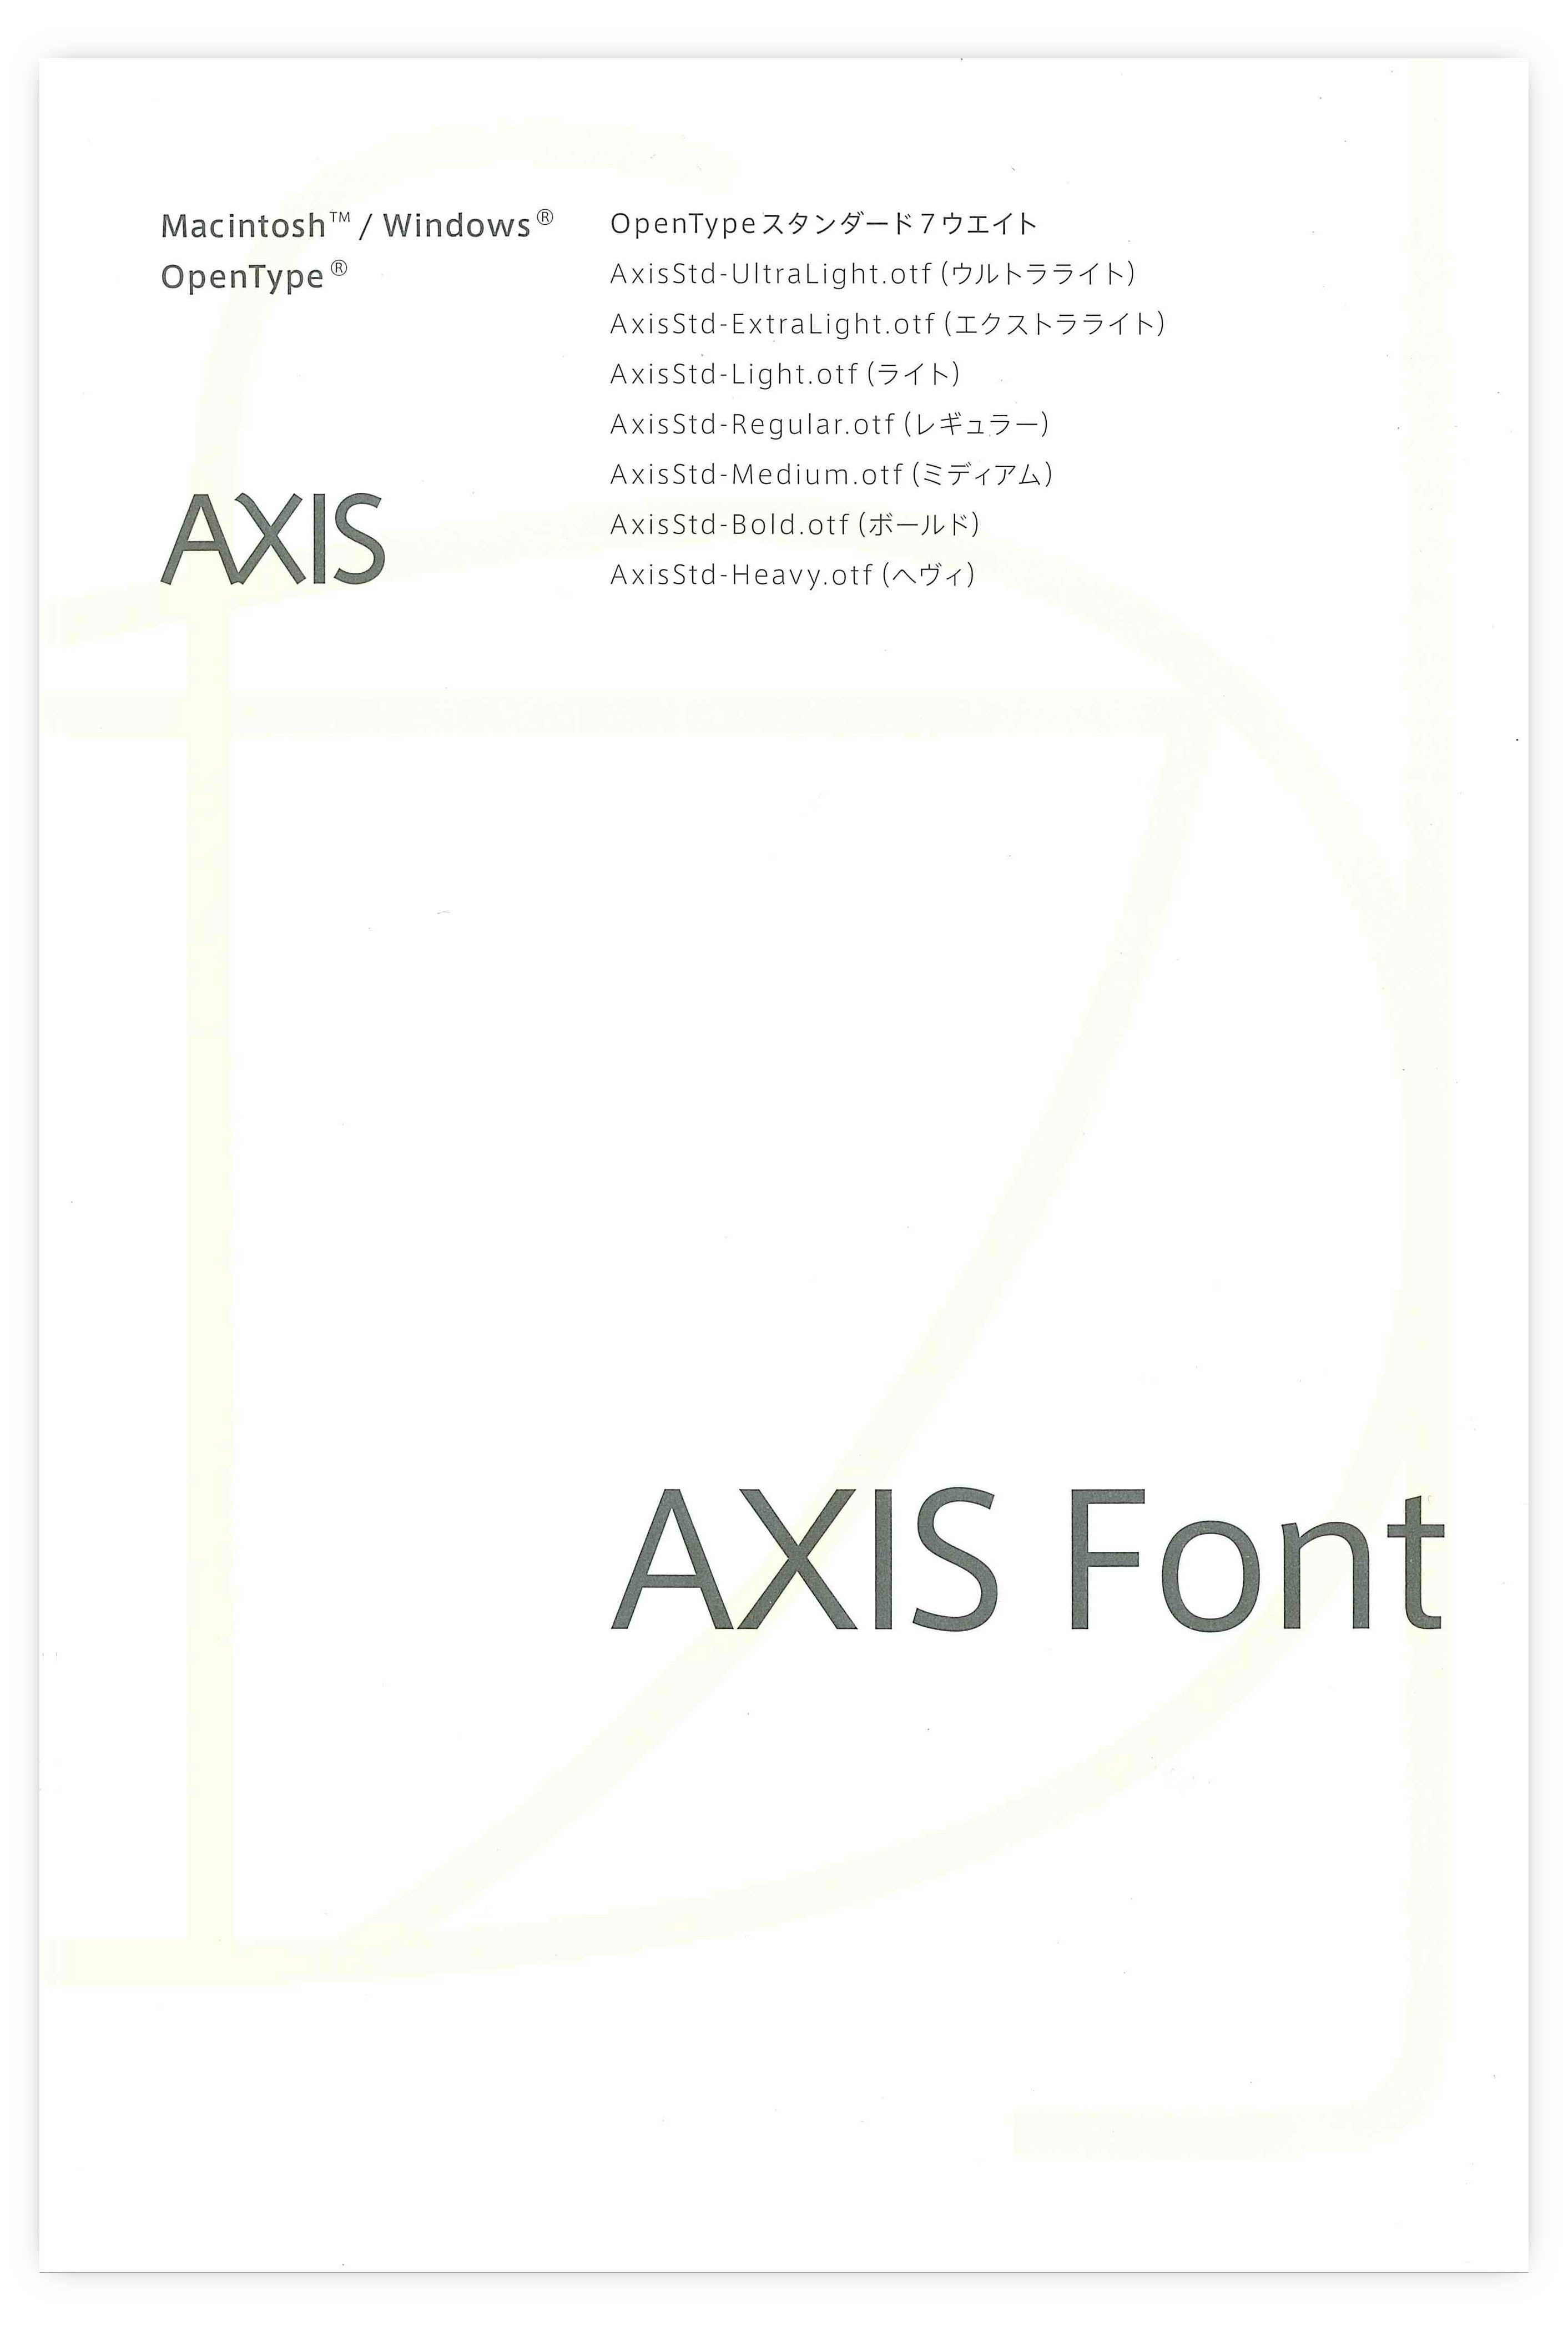 Release of the AXIS Font